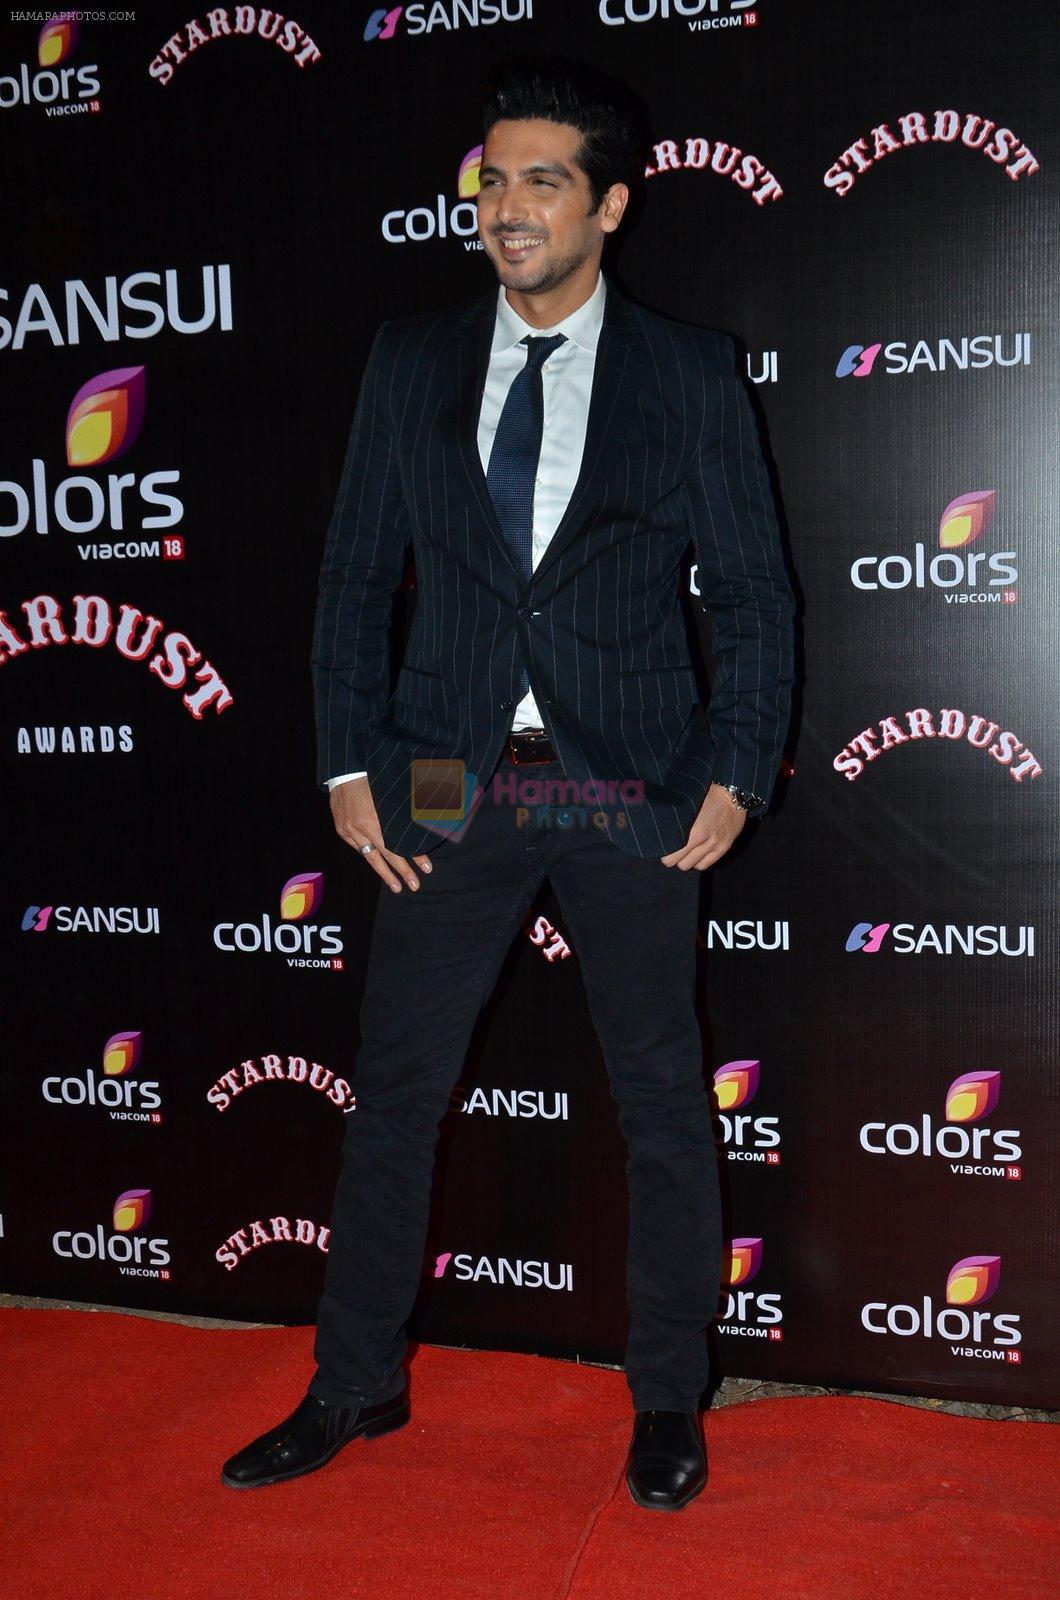 Zayed Khan at Sansui Stardust Awards red carpet in Mumbai on 14th Dec 2014